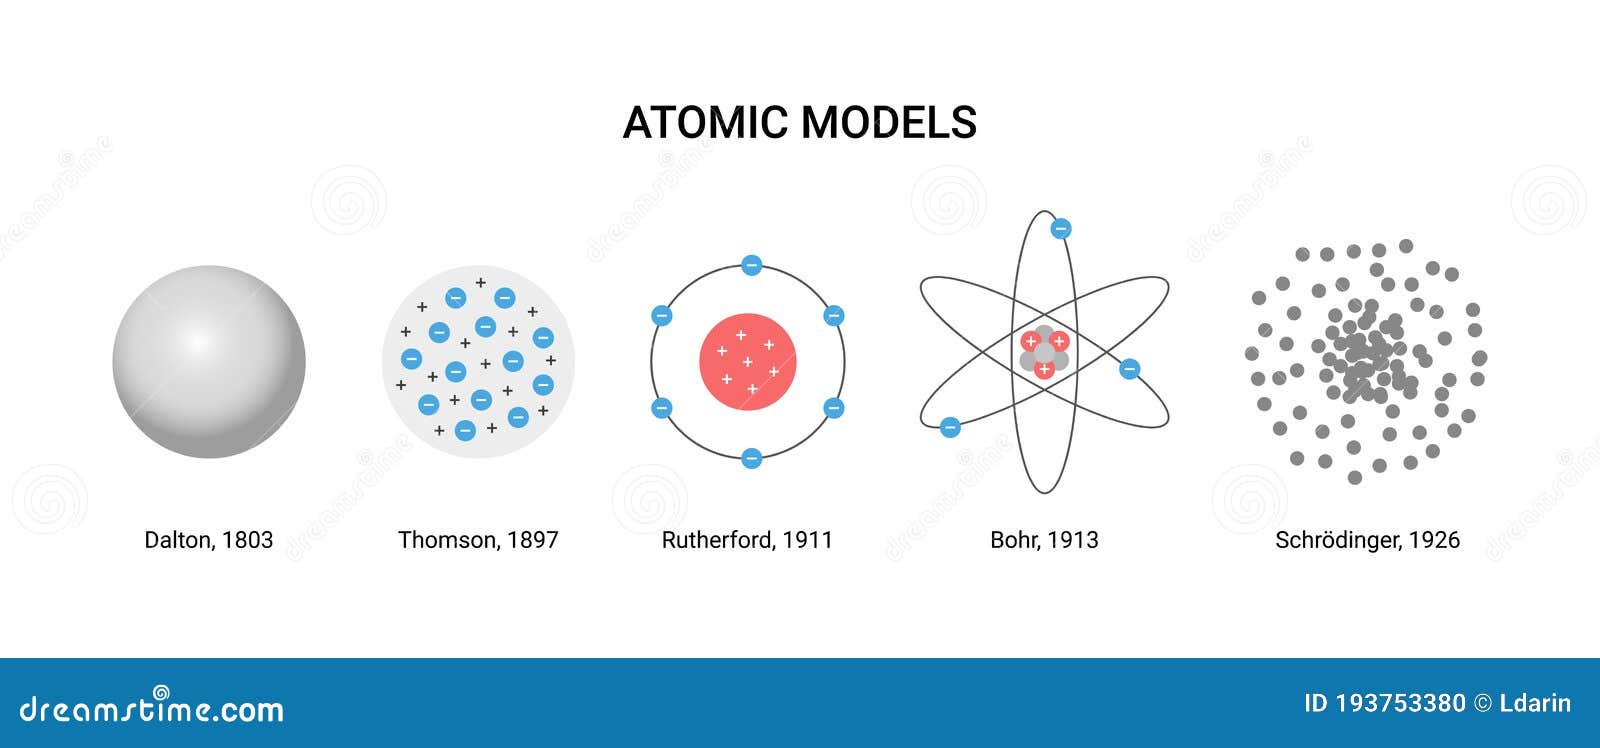   of atomic models.  scientists and years